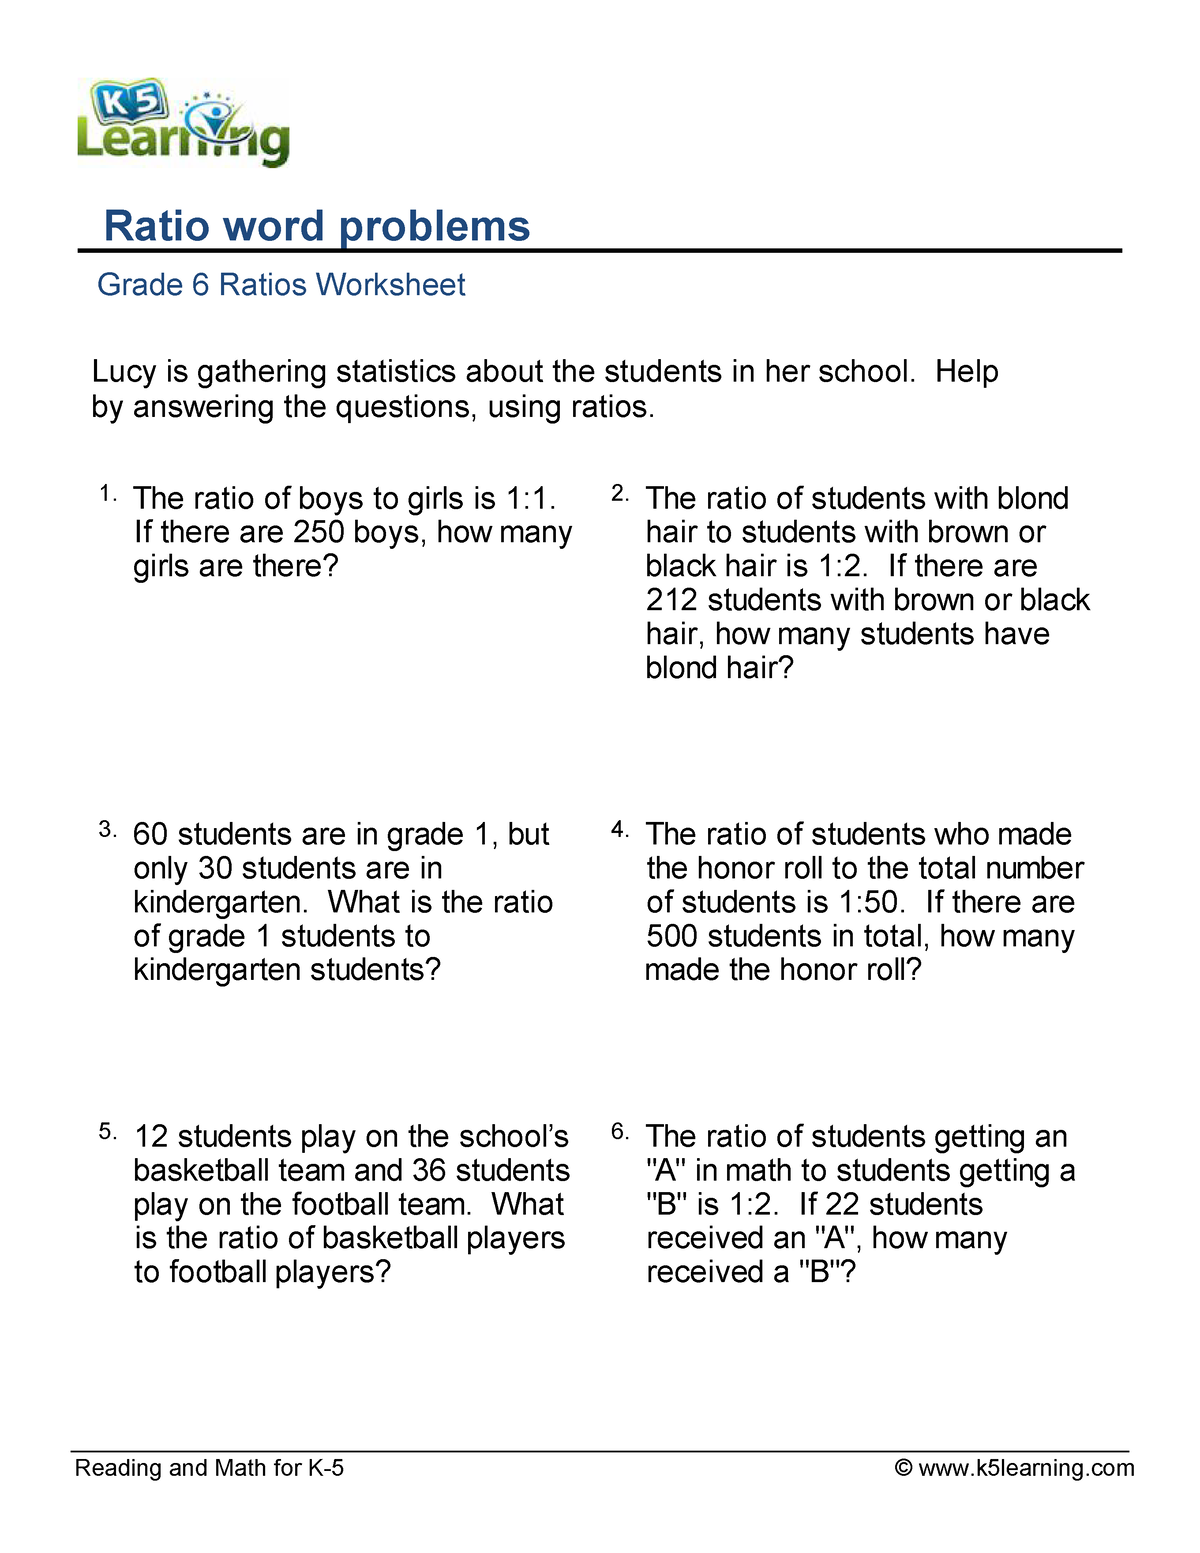 grade-6-ratio-word-problems-b-reading-and-math-for-k-5-k5learning